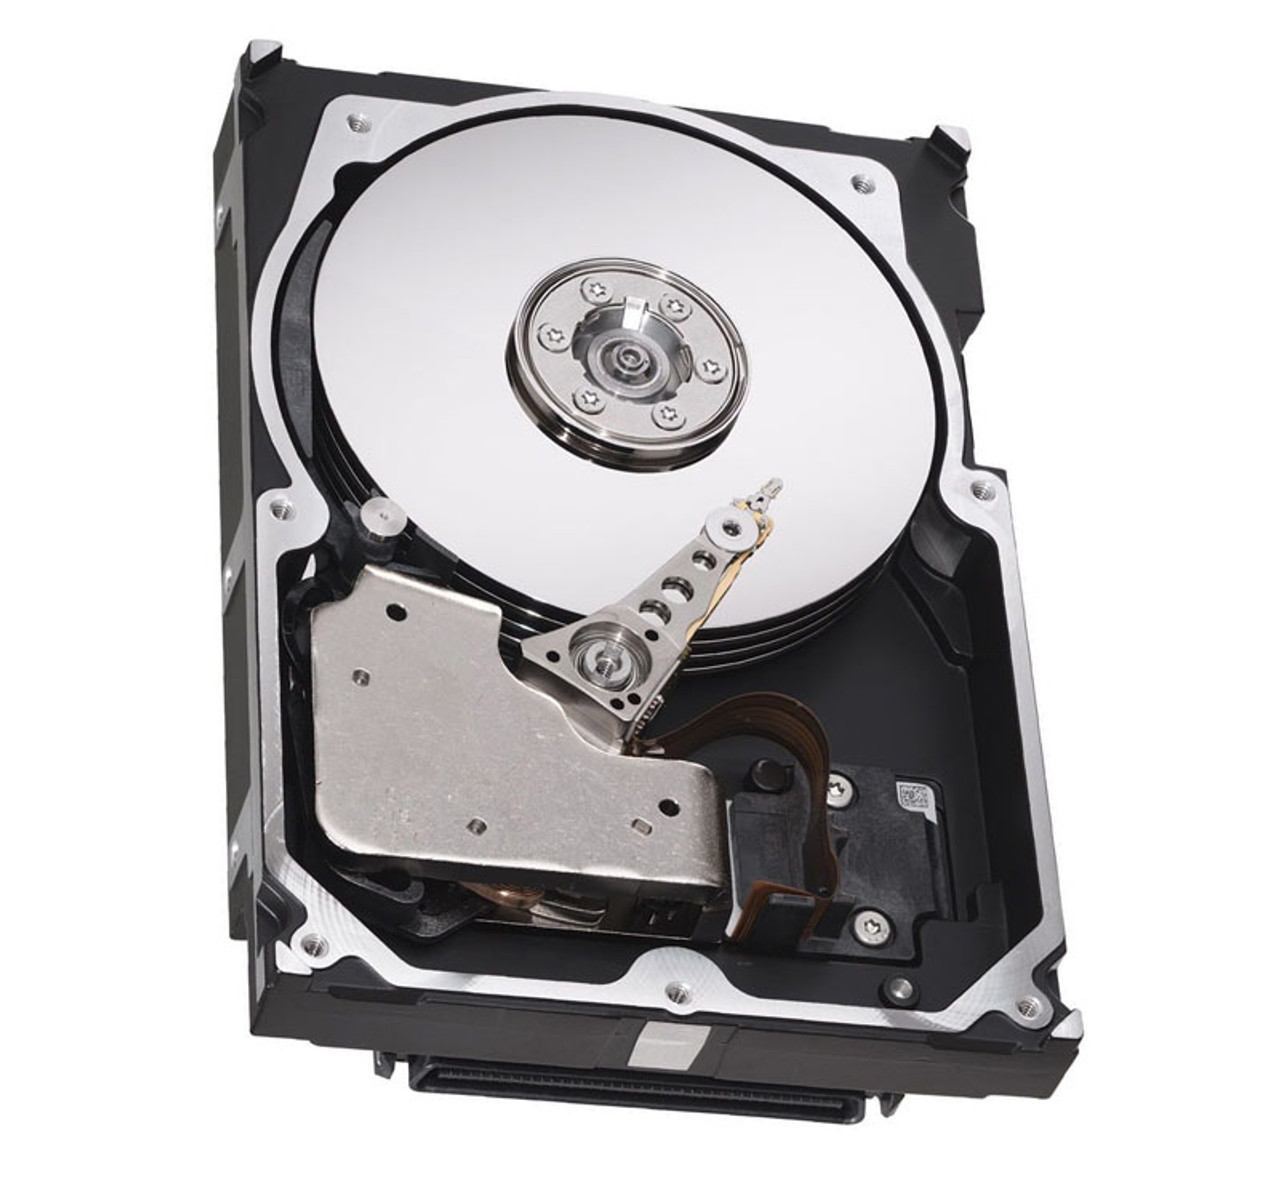 A5531-69002 - HP 18.2GB 10000RPM Ultra-2 Wide SCSI Hot-Pluggable LVD 80-Pin 3.5-inch Hard Drive